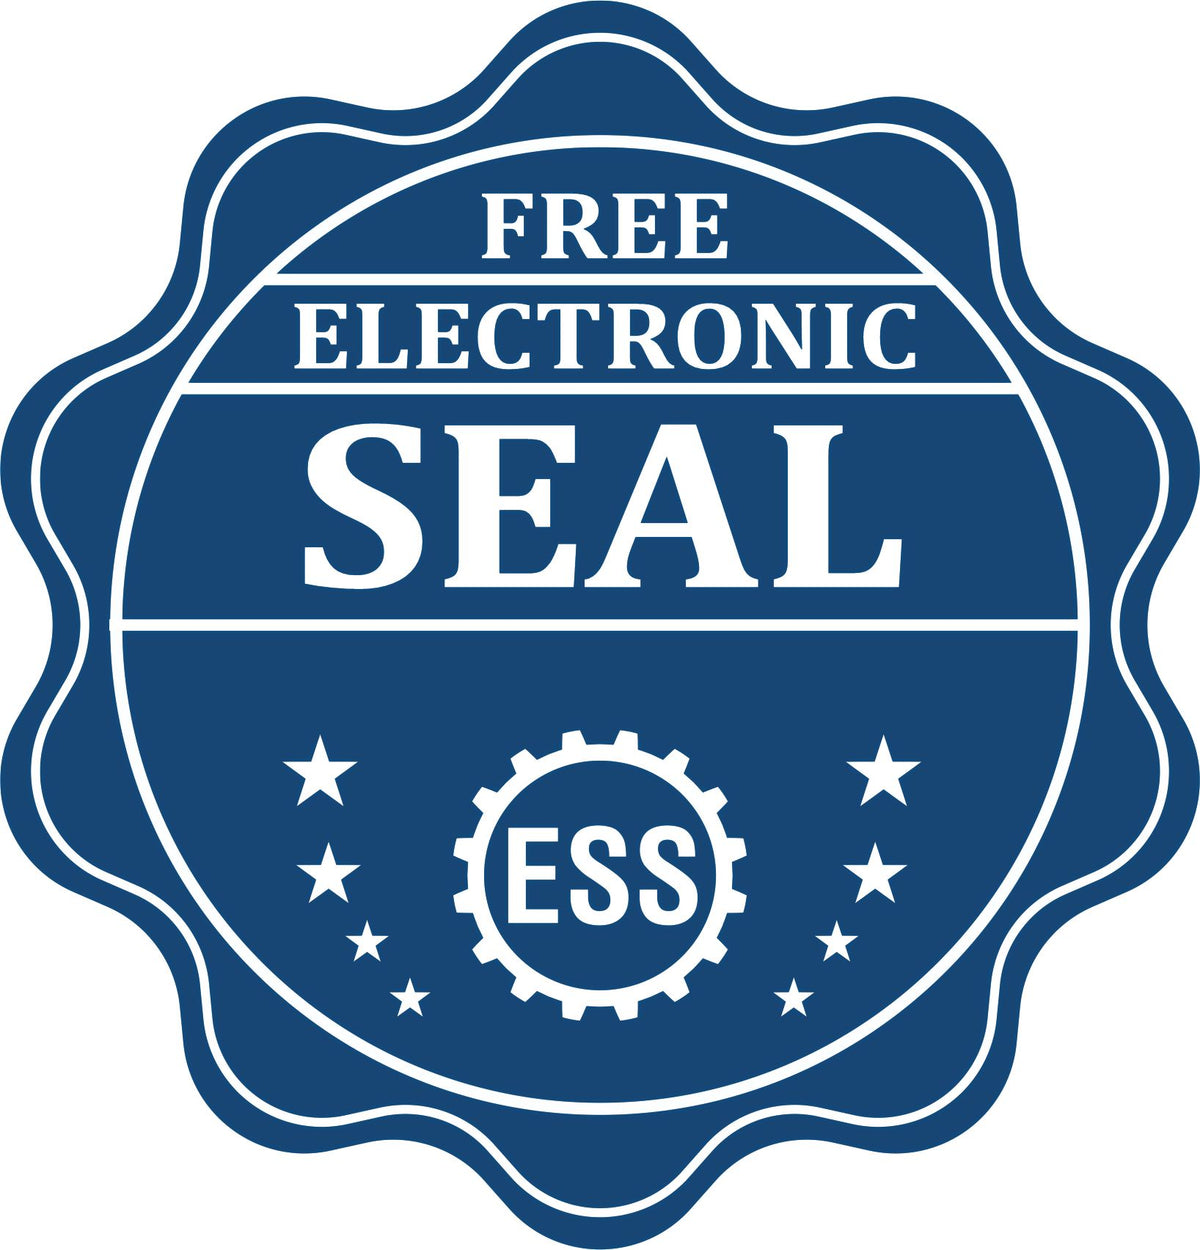 A badge showing a free electronic seal for the PSI Colorado Notary Stamp with stars and the ESS gear on the emblem.